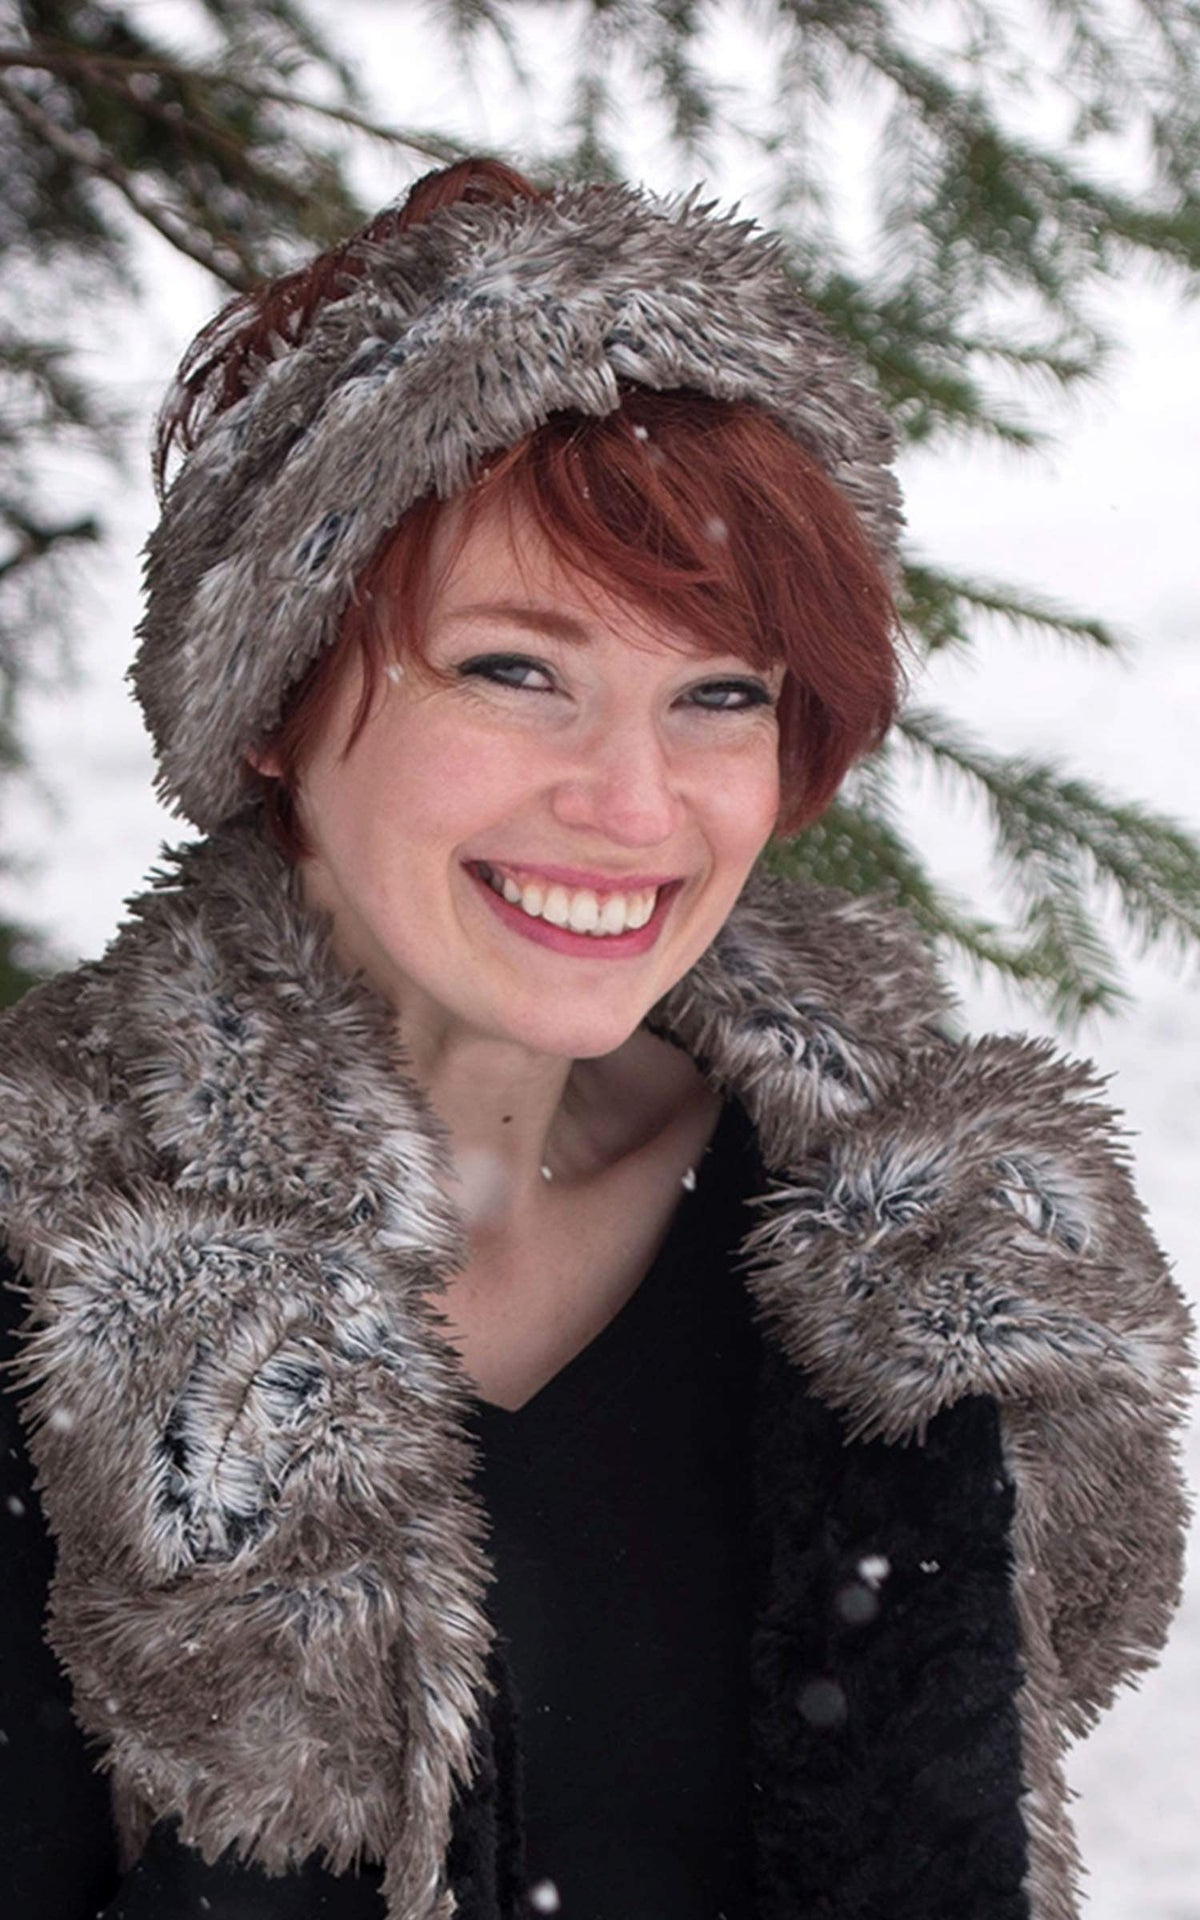 Model in snow wearing  Headband, Fingerless Gloves and Vest | Arctic Fox Gray and Cream Faux Fur | Handmade by Pandemonium Millinery Seattle, WA USA